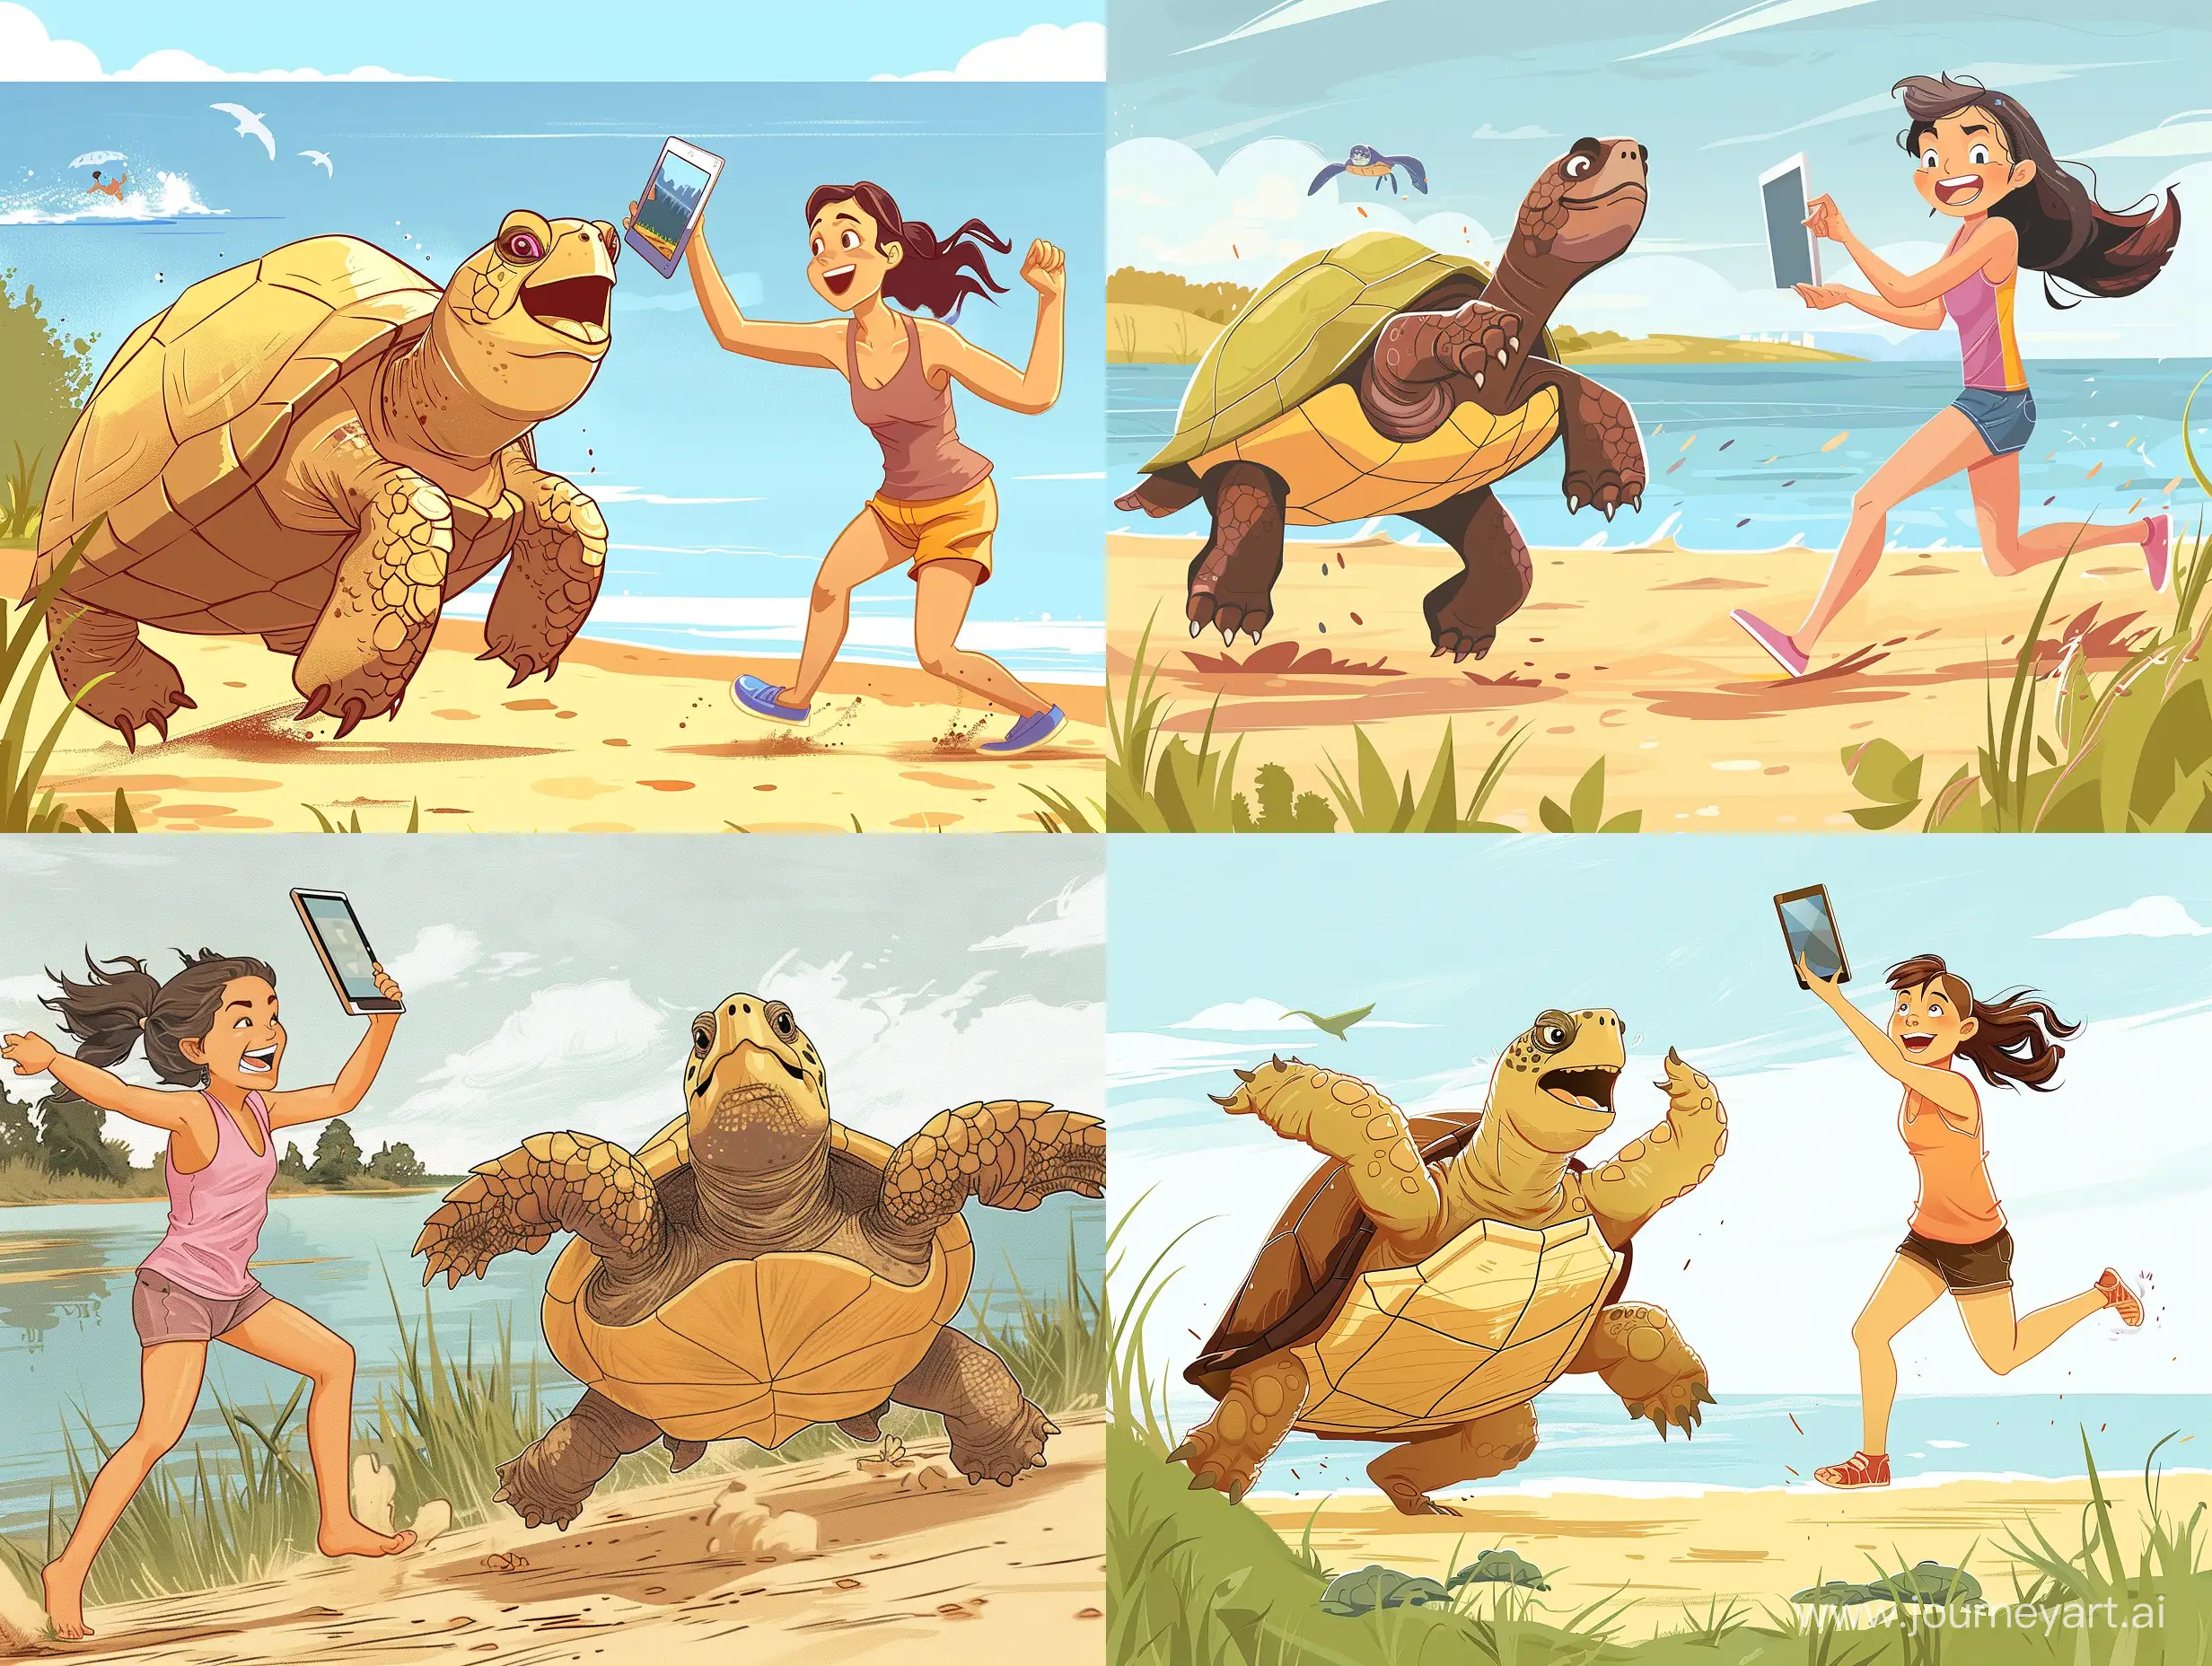 Playful-Summer-Scene-Cartoonish-Illustration-of-a-Girl-Chasing-a-Turtle-by-the-Lake